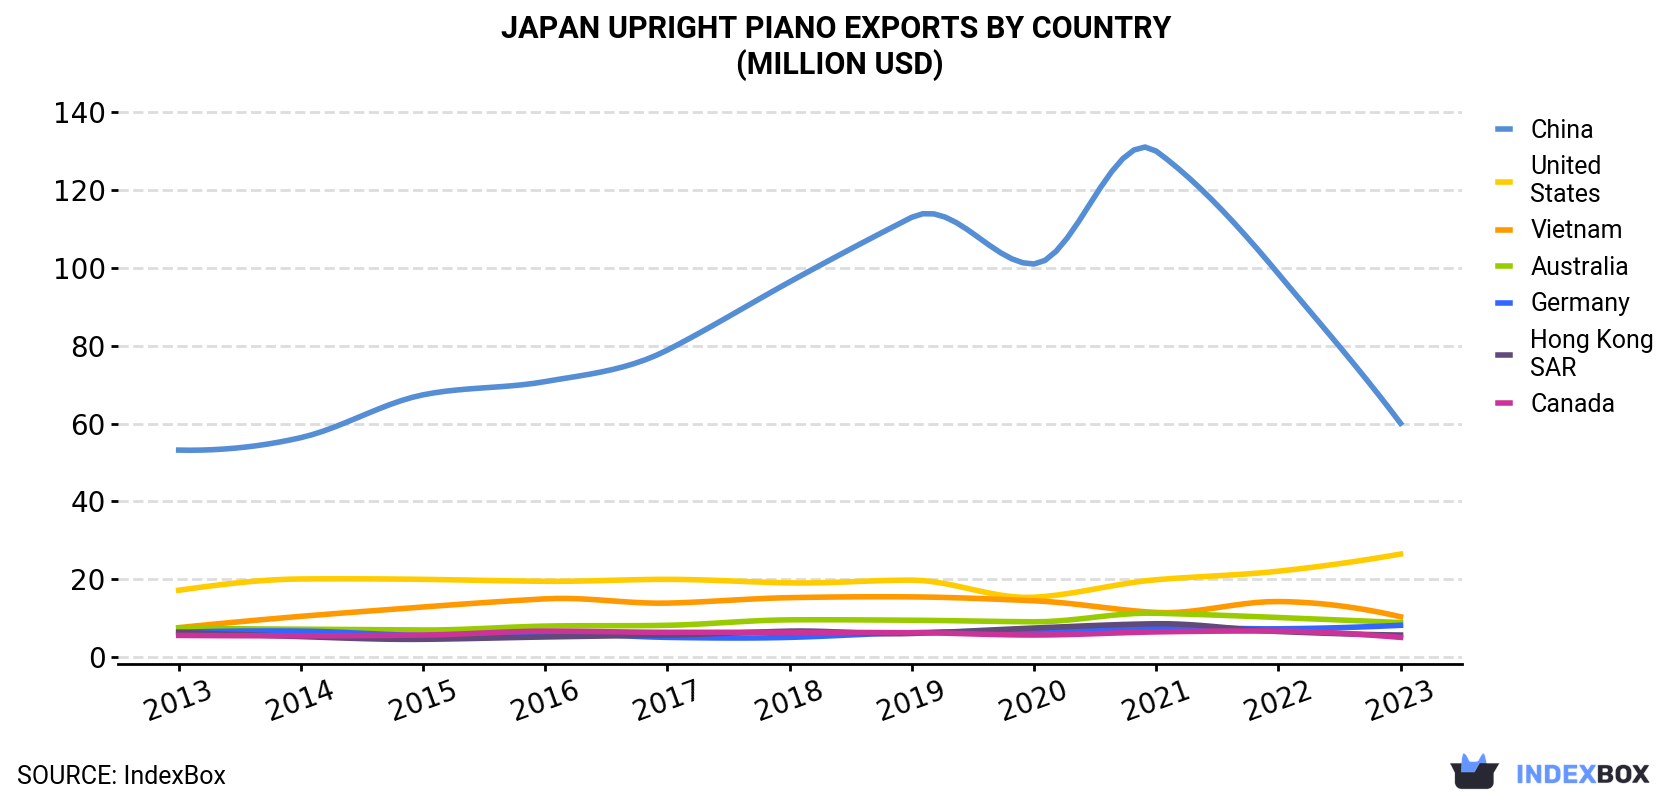 Japan Upright Piano Exports By Country (Million USD)